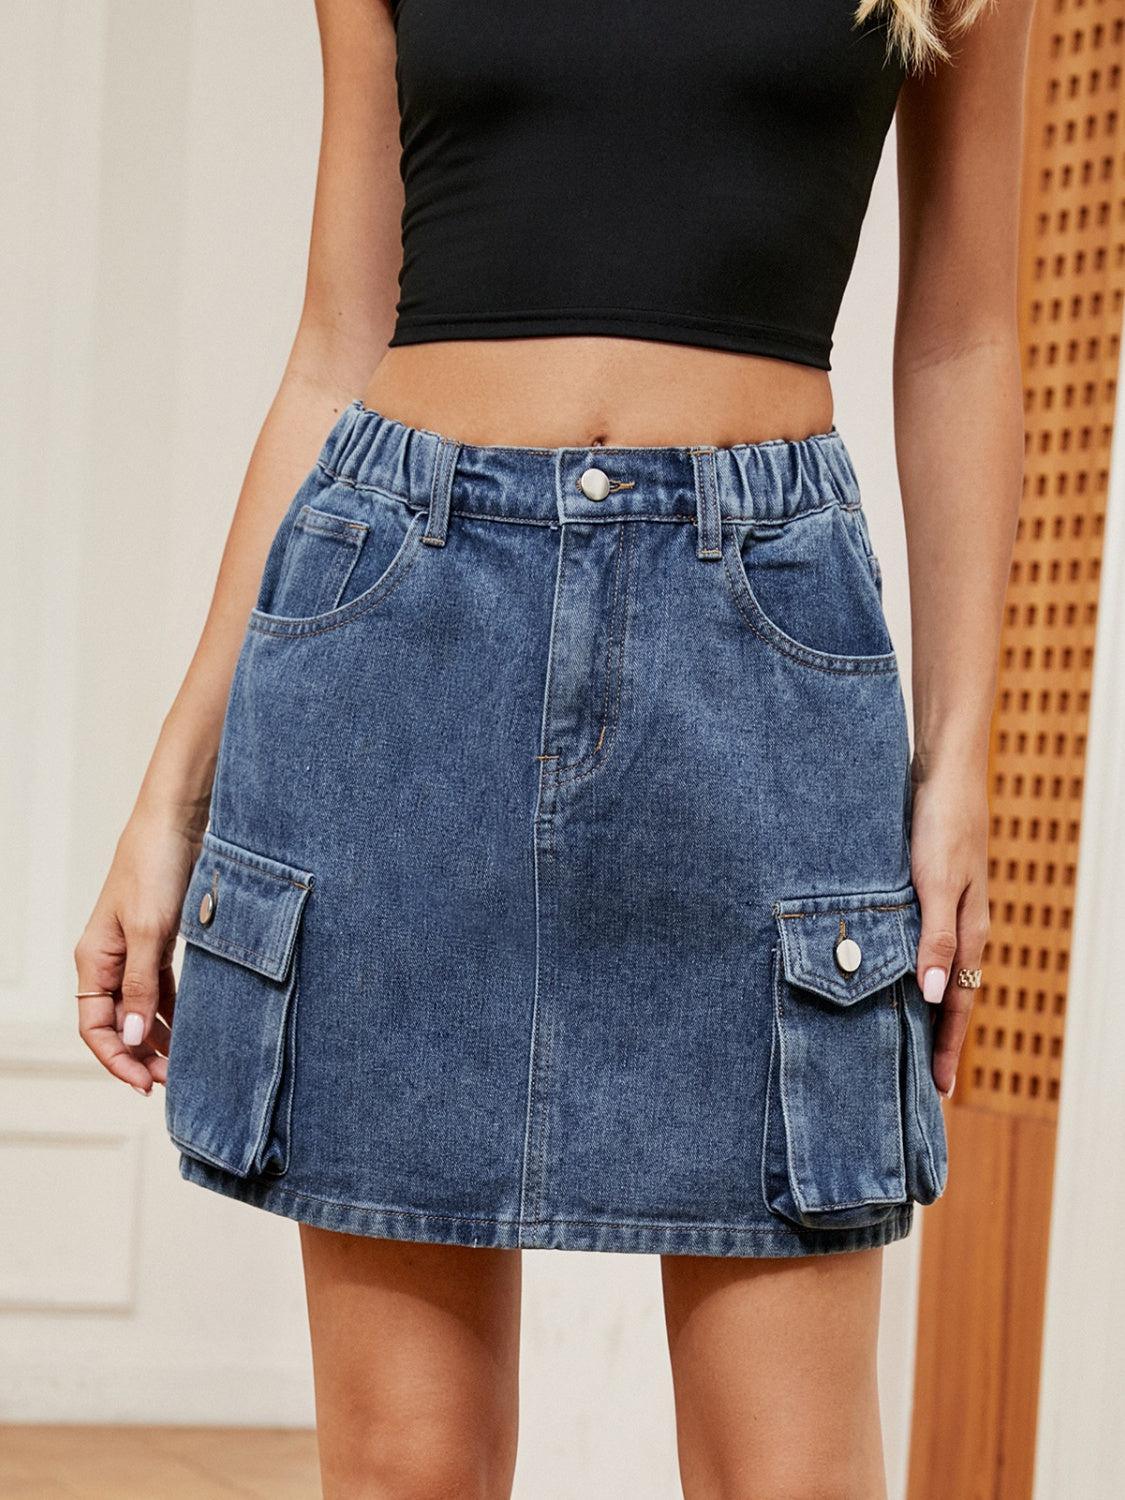 a woman in a black top and a denim skirt